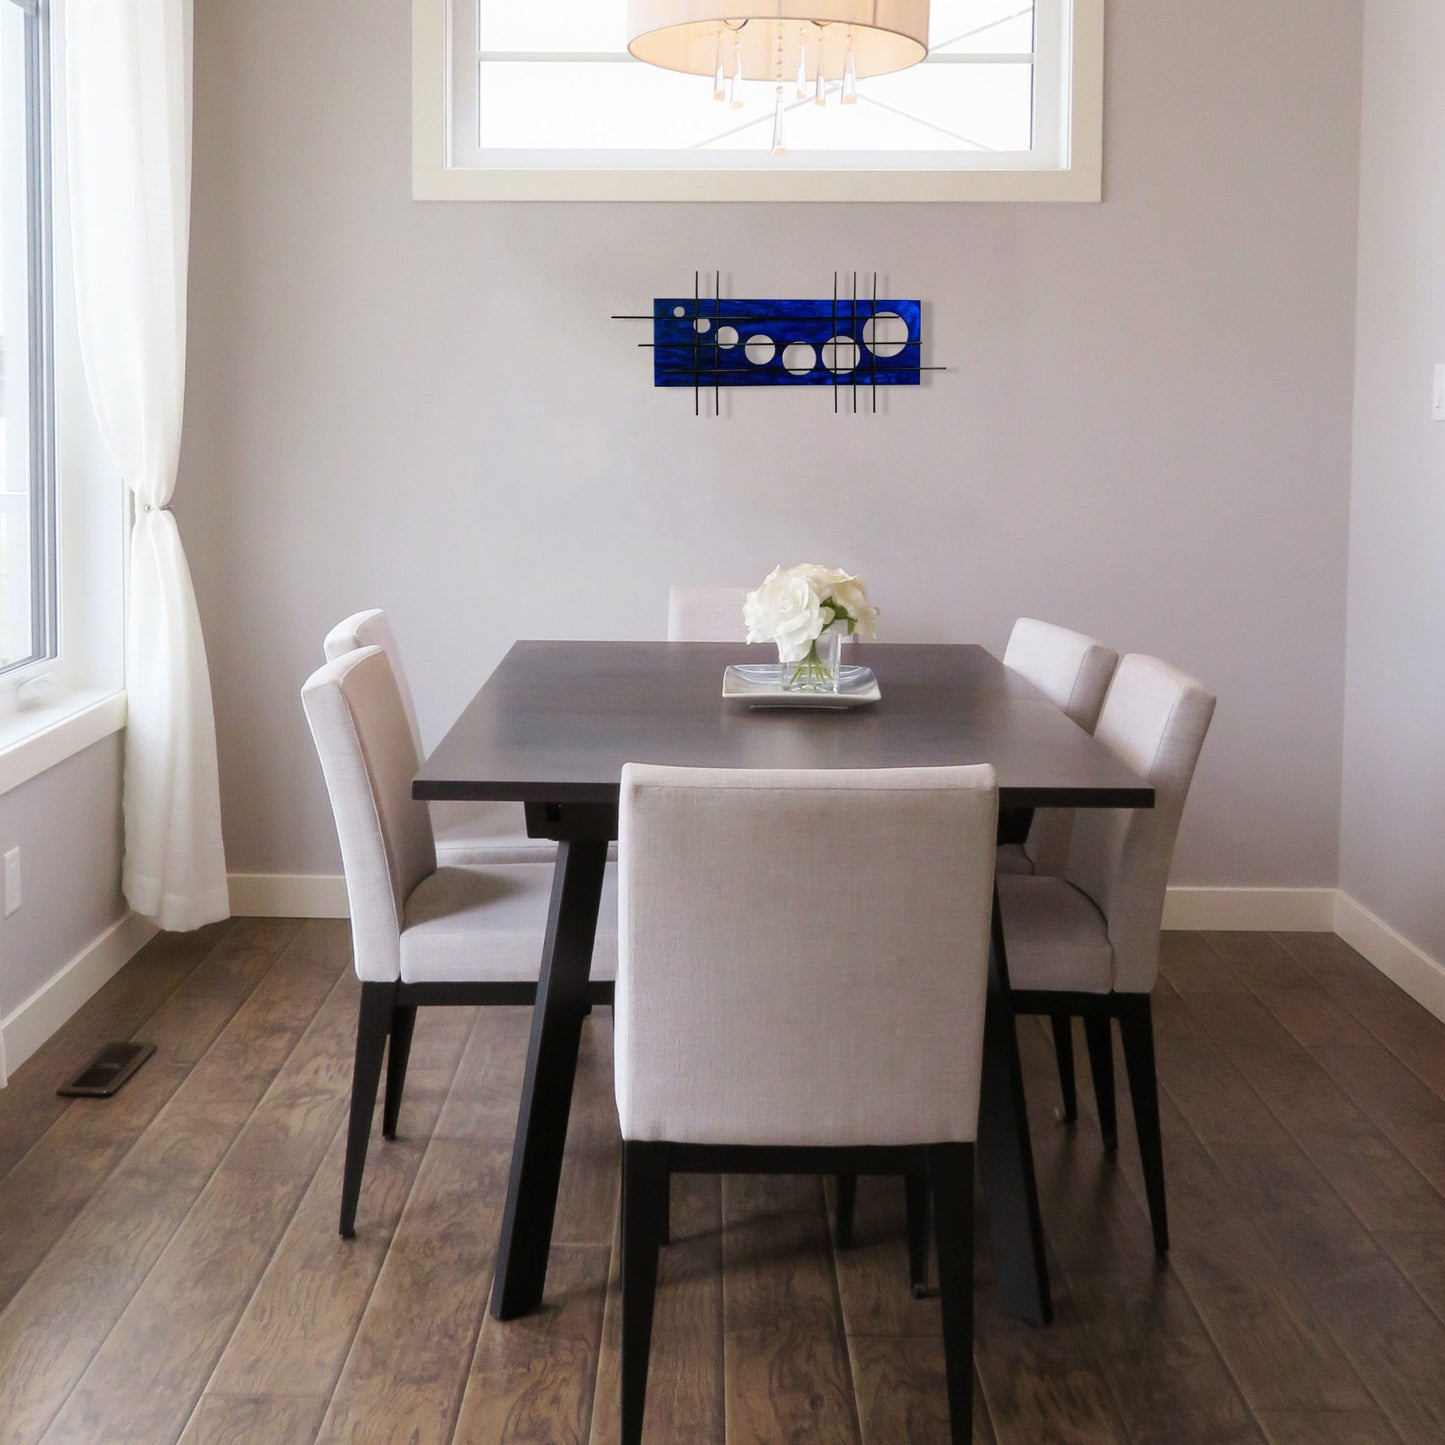 blue-holy-stix-in-dining-room-scaled